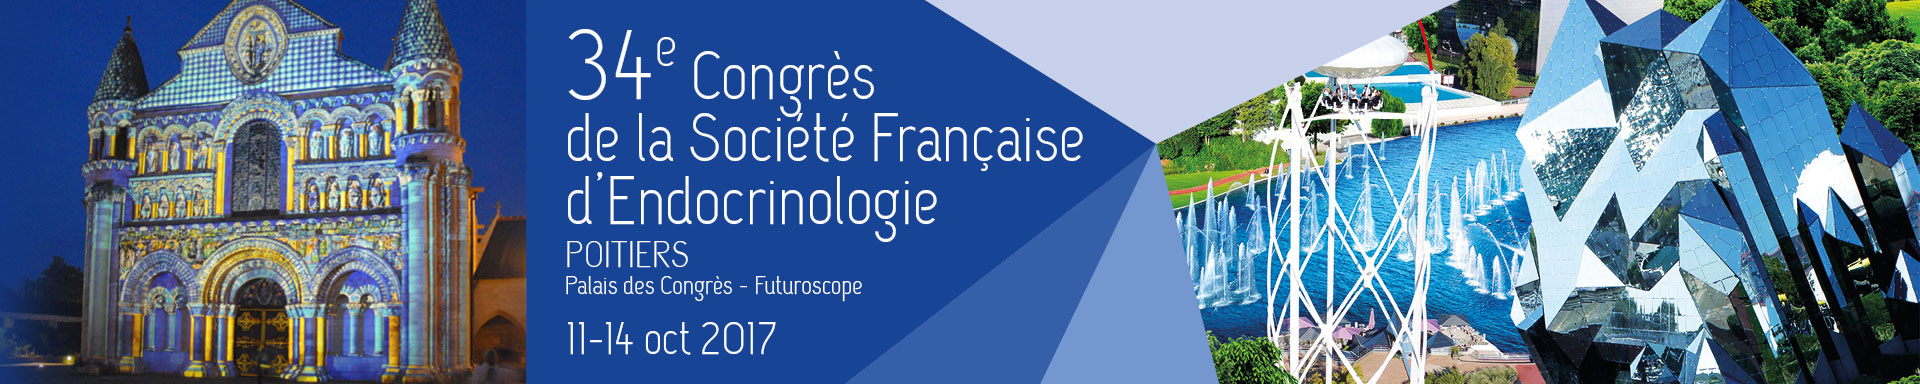 34th Congress of the French Society of Endocrinology (SFE) 2017